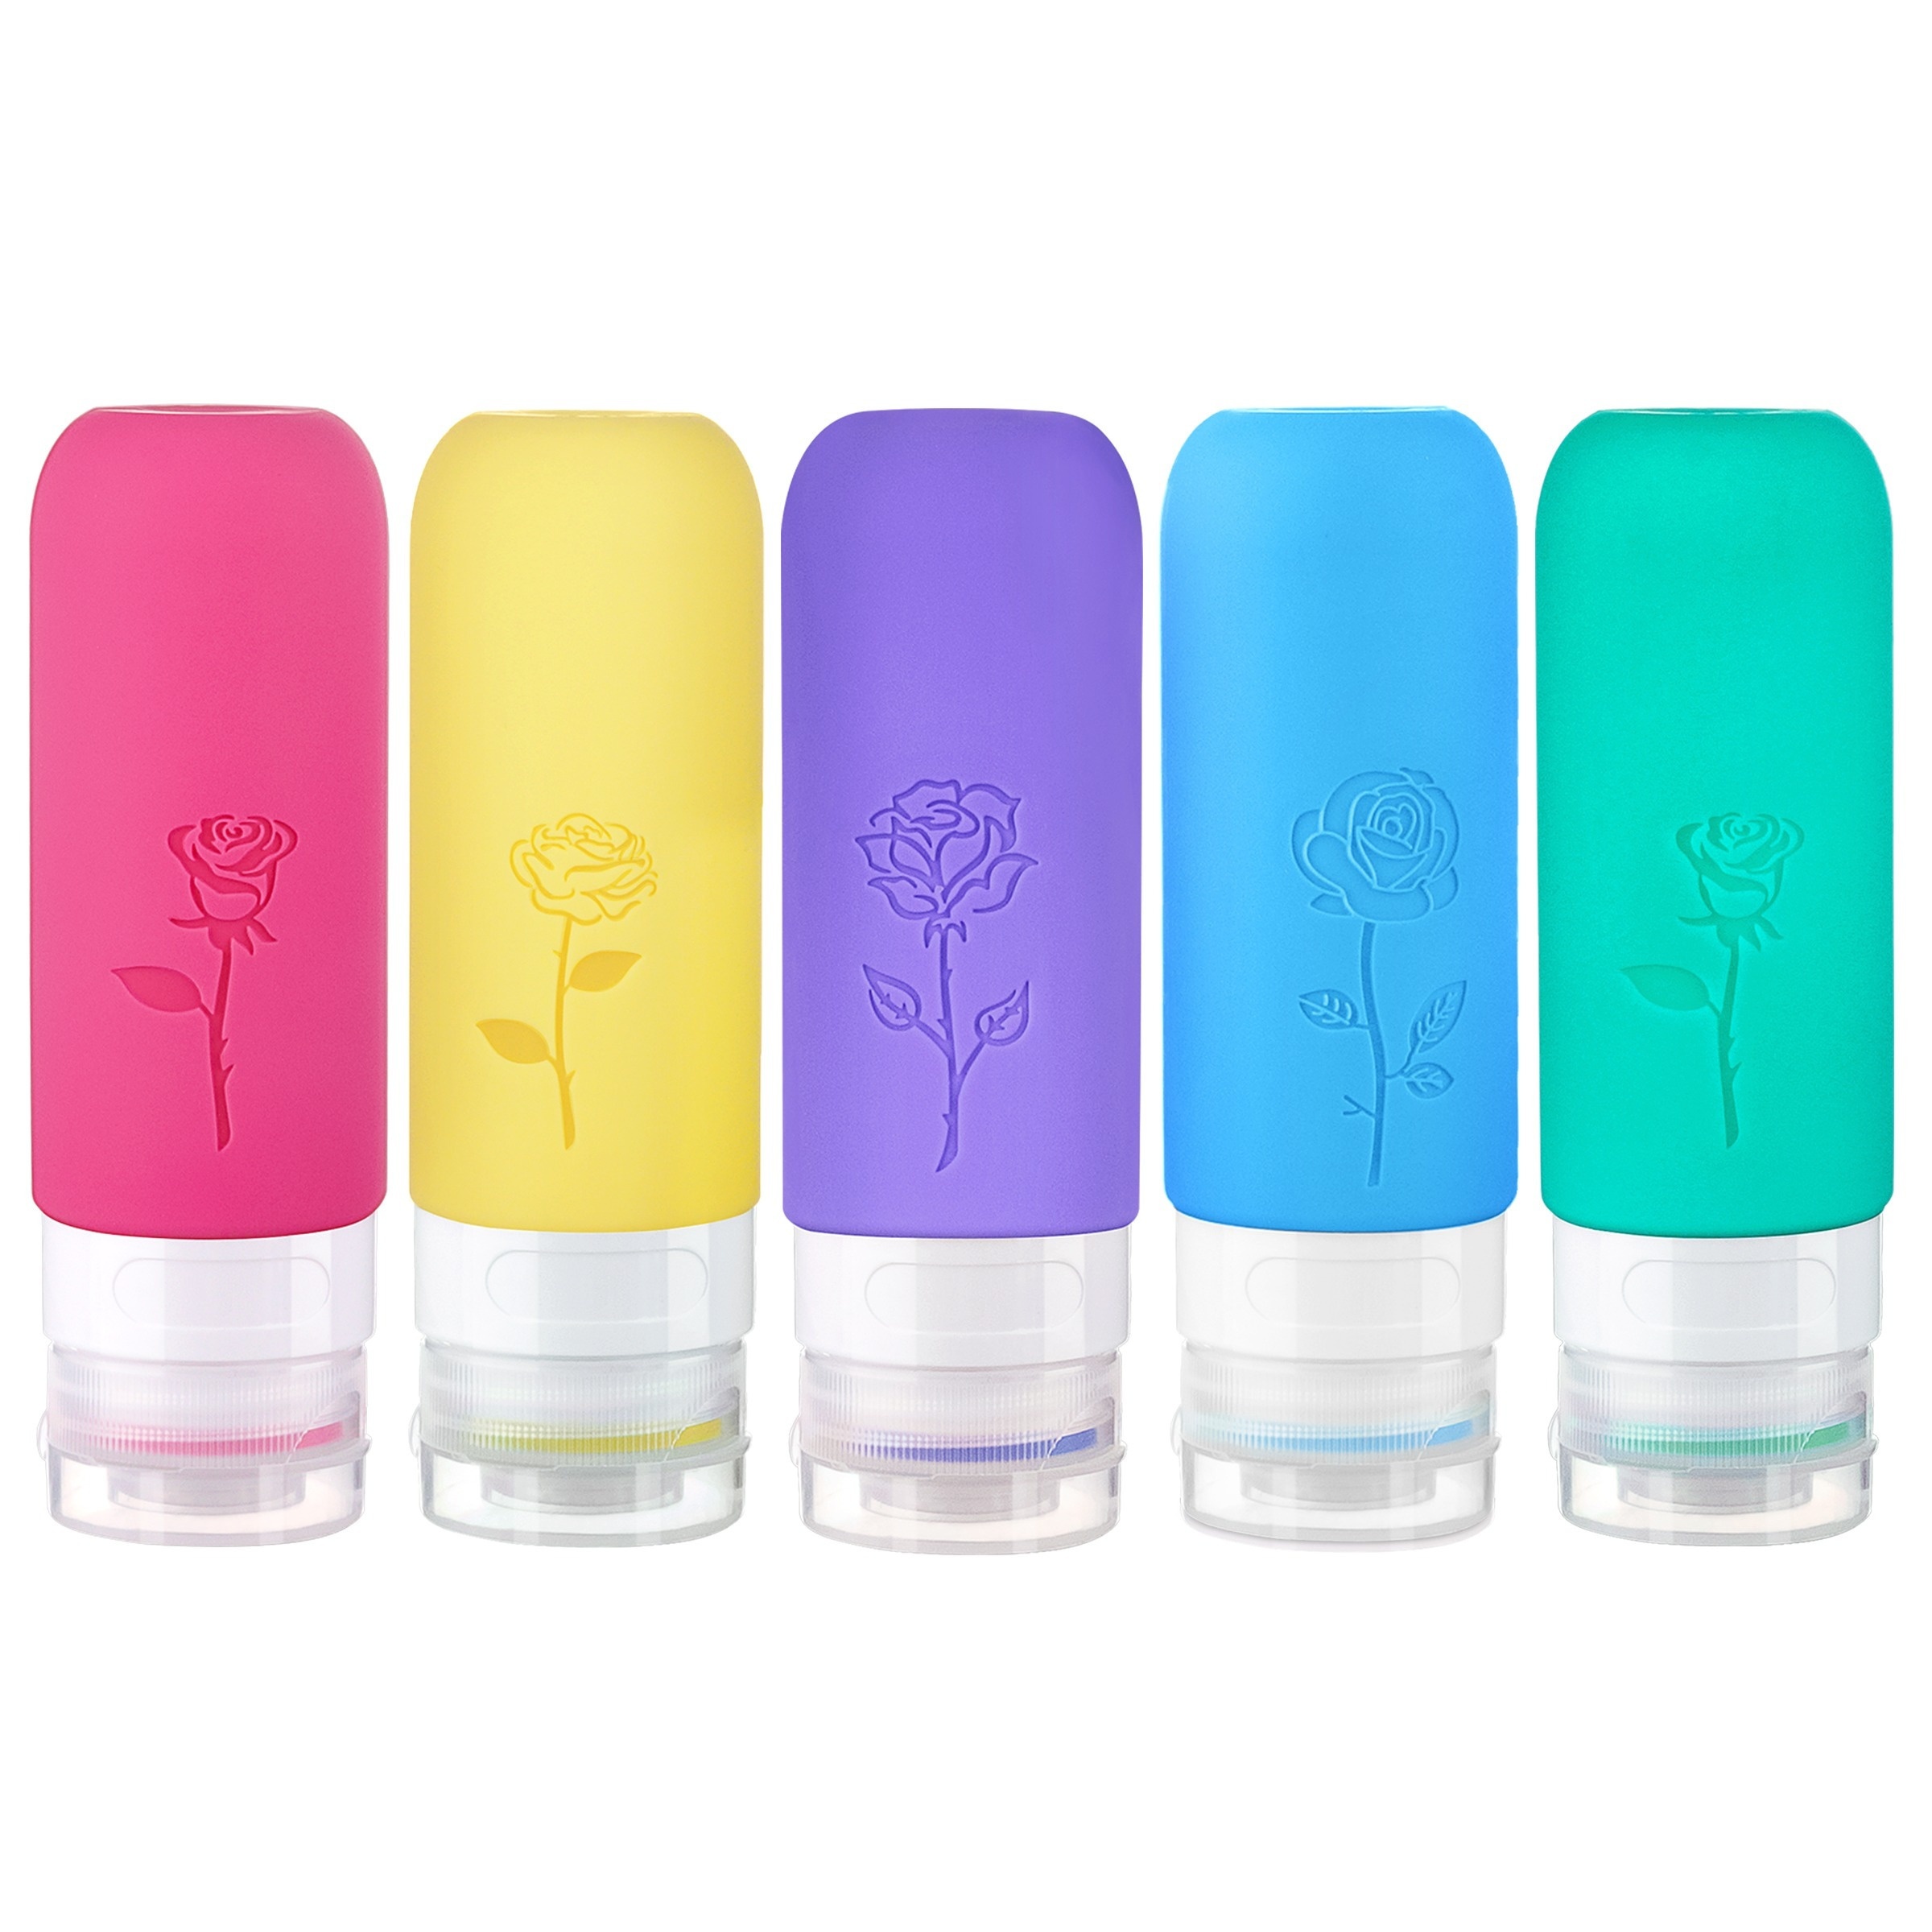 

5pcs Silicone Travel Bottles, 90ml Travel Toiletry Bottles, Leak Proof Travel Size Containers (2pcs With Word Label)